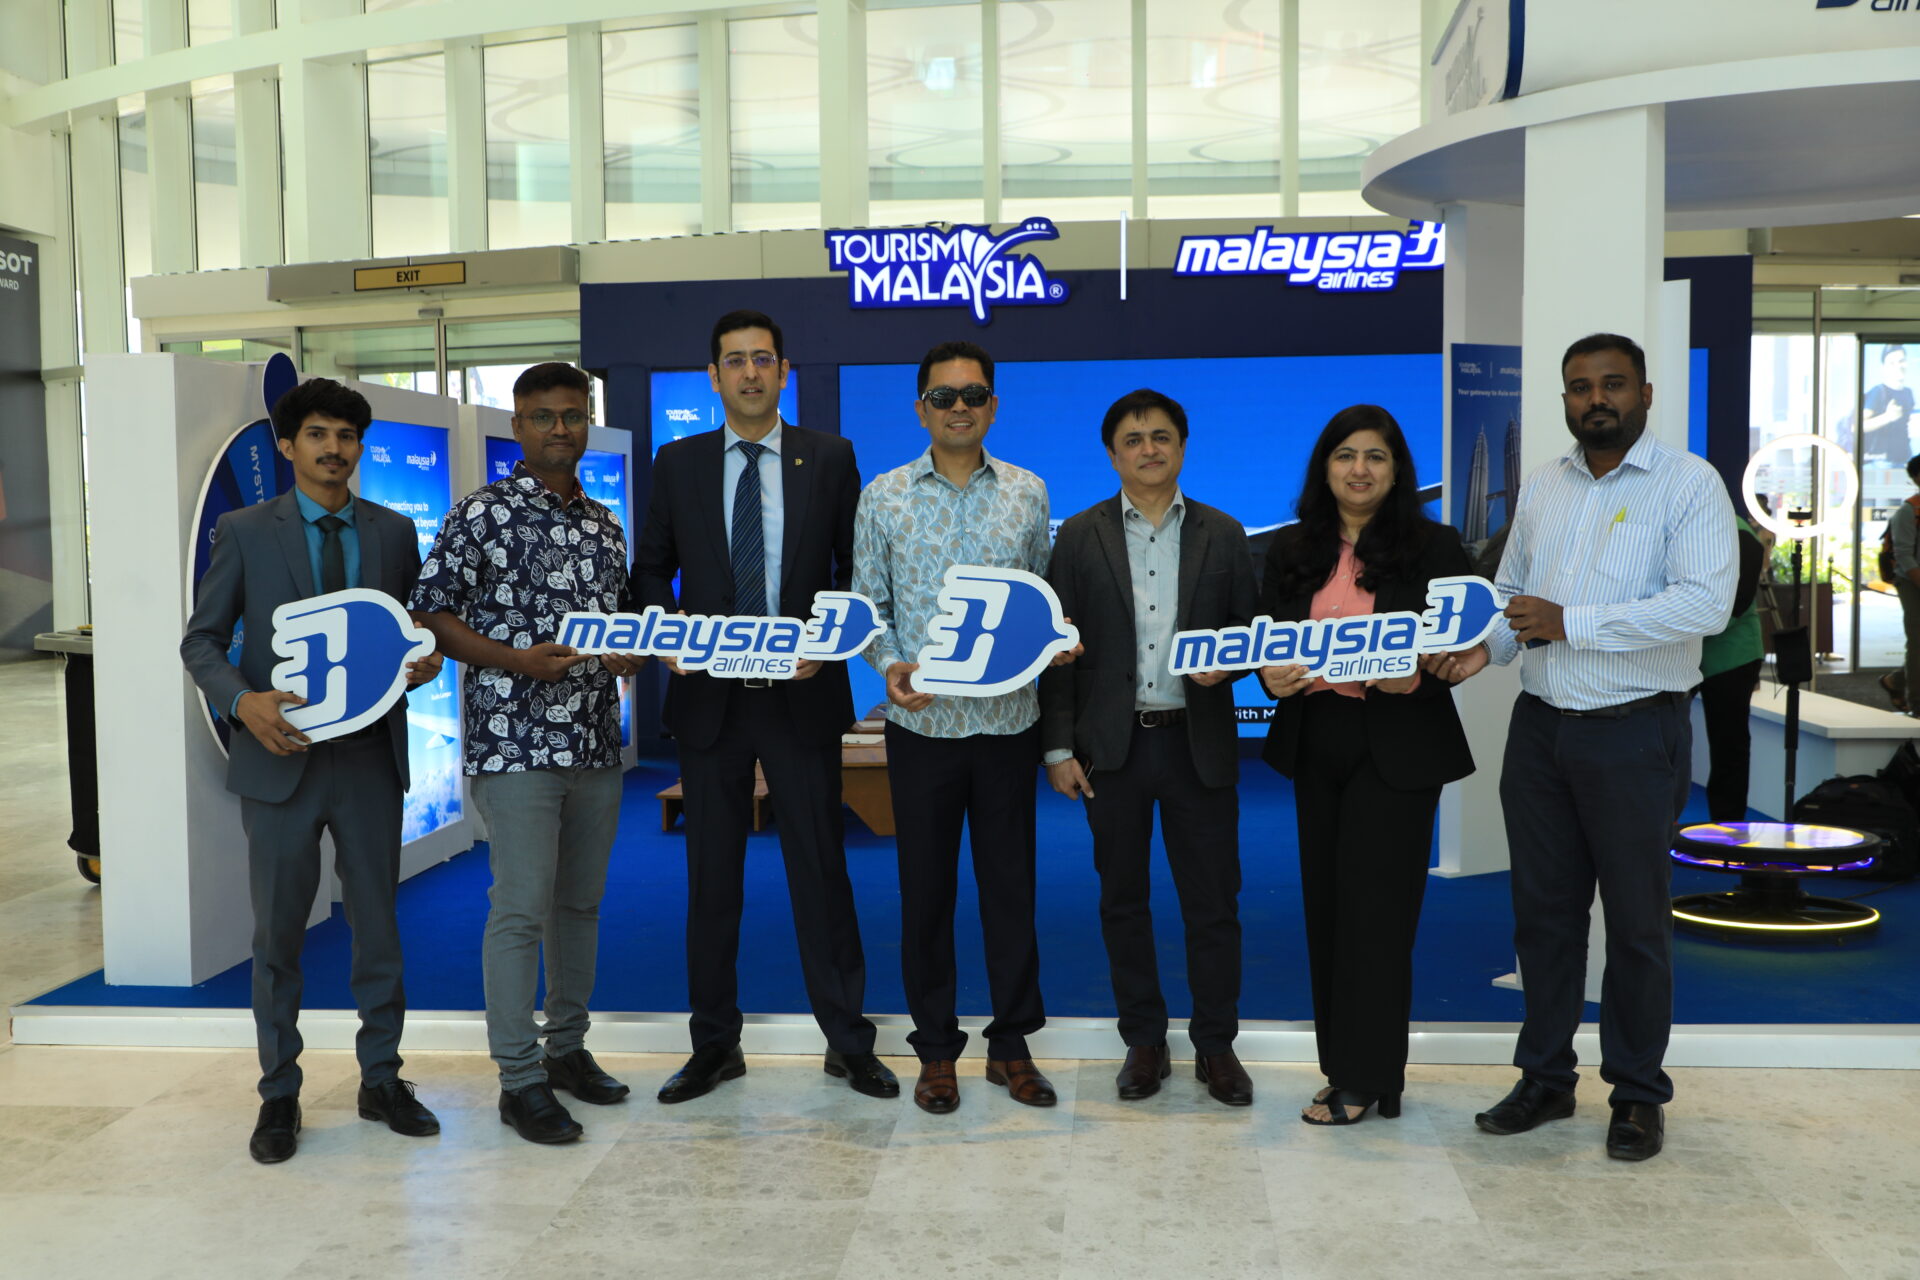 Malaysia Airlines, Tourism Malaysia Host Successful Hospitality Event at Lulu Mall, Trivandrum